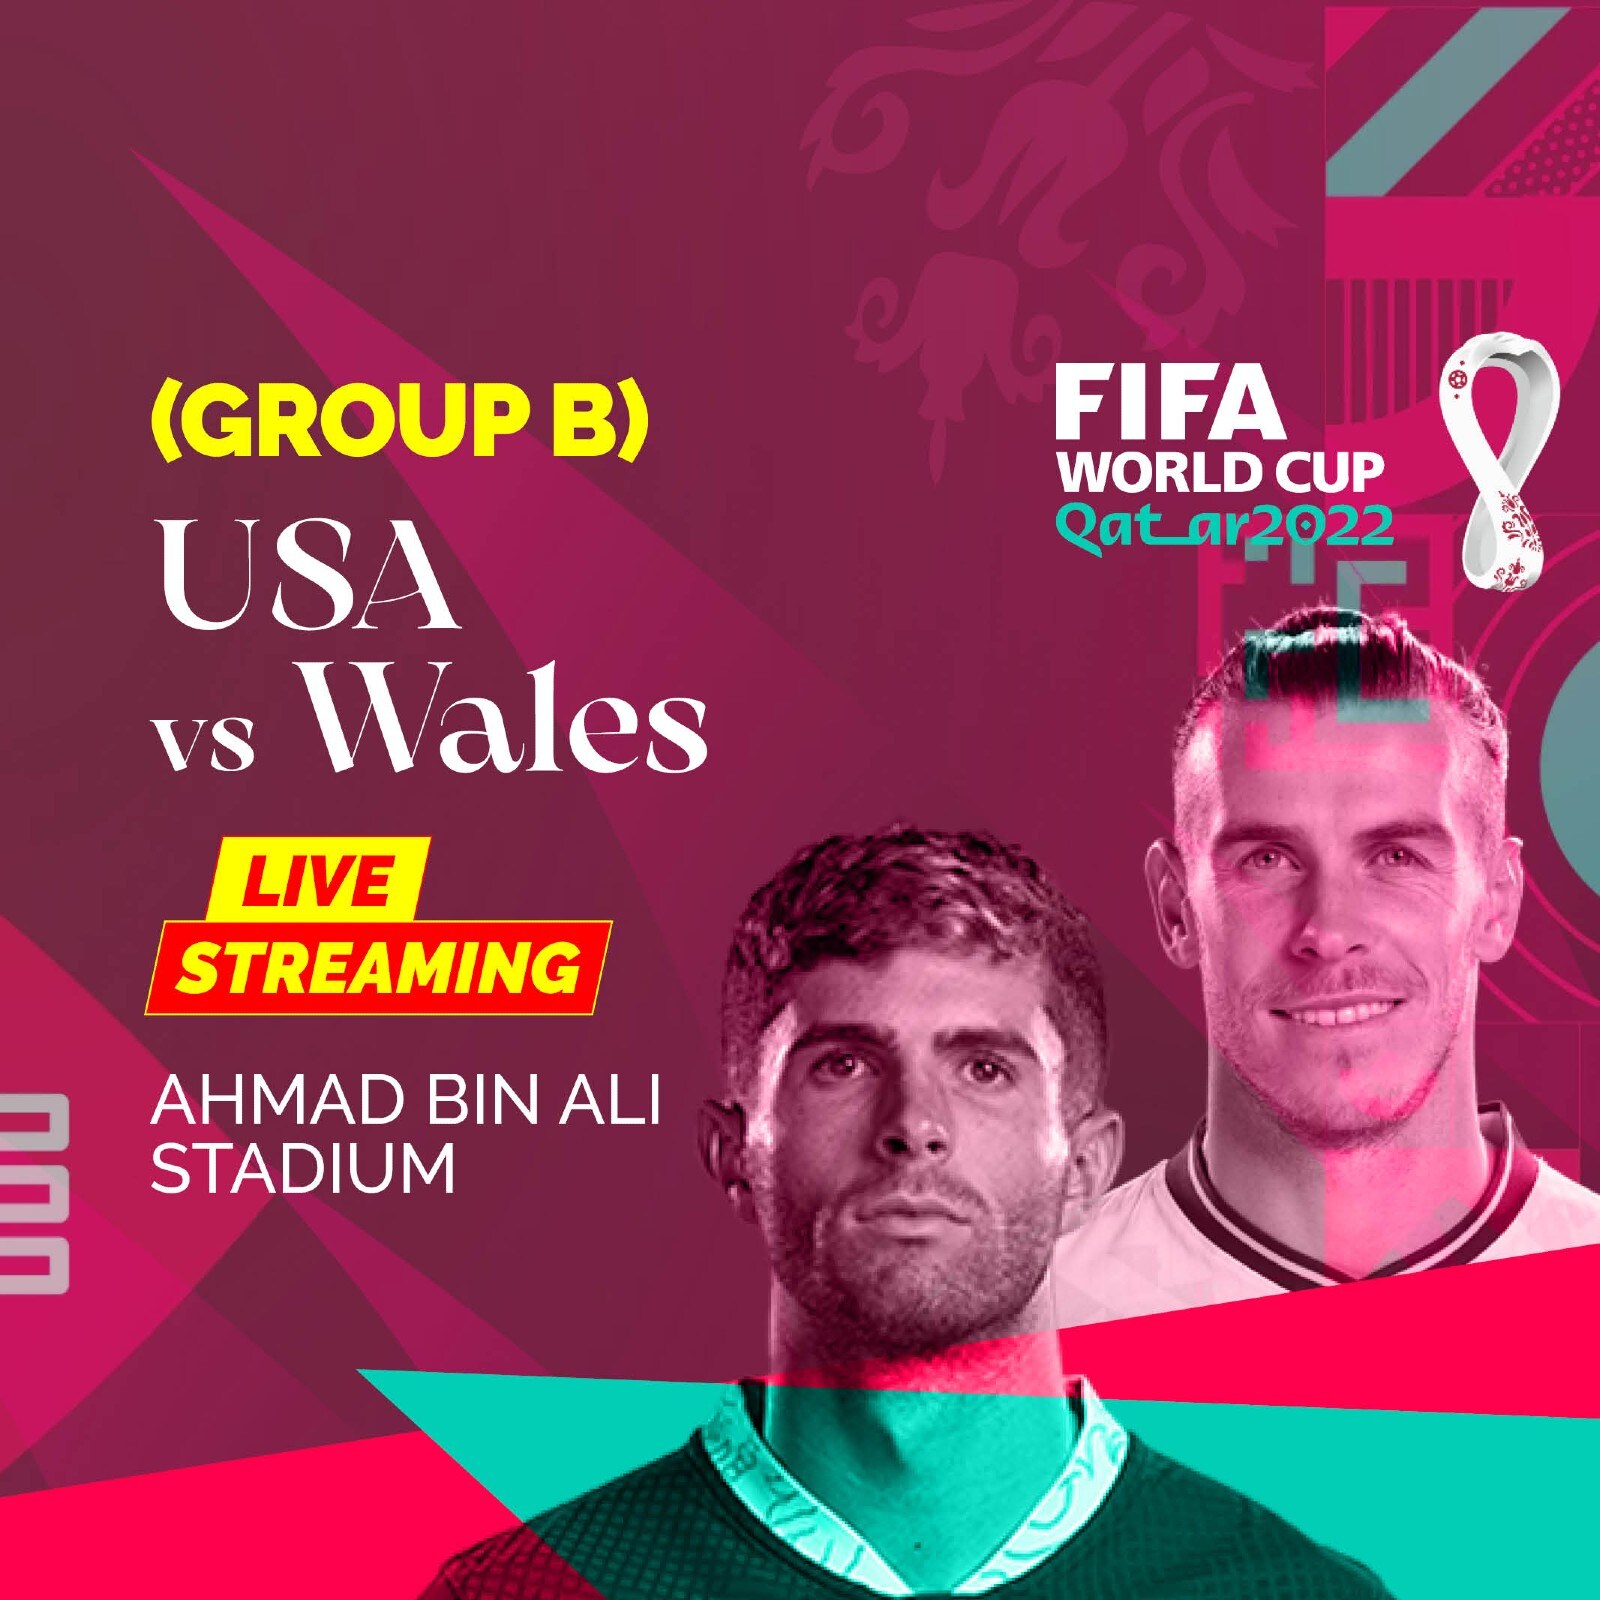 USA vs Wales Live Streaming When and Where to Watch FIFA World Cup 2022 Live Coverage on Live TV Online